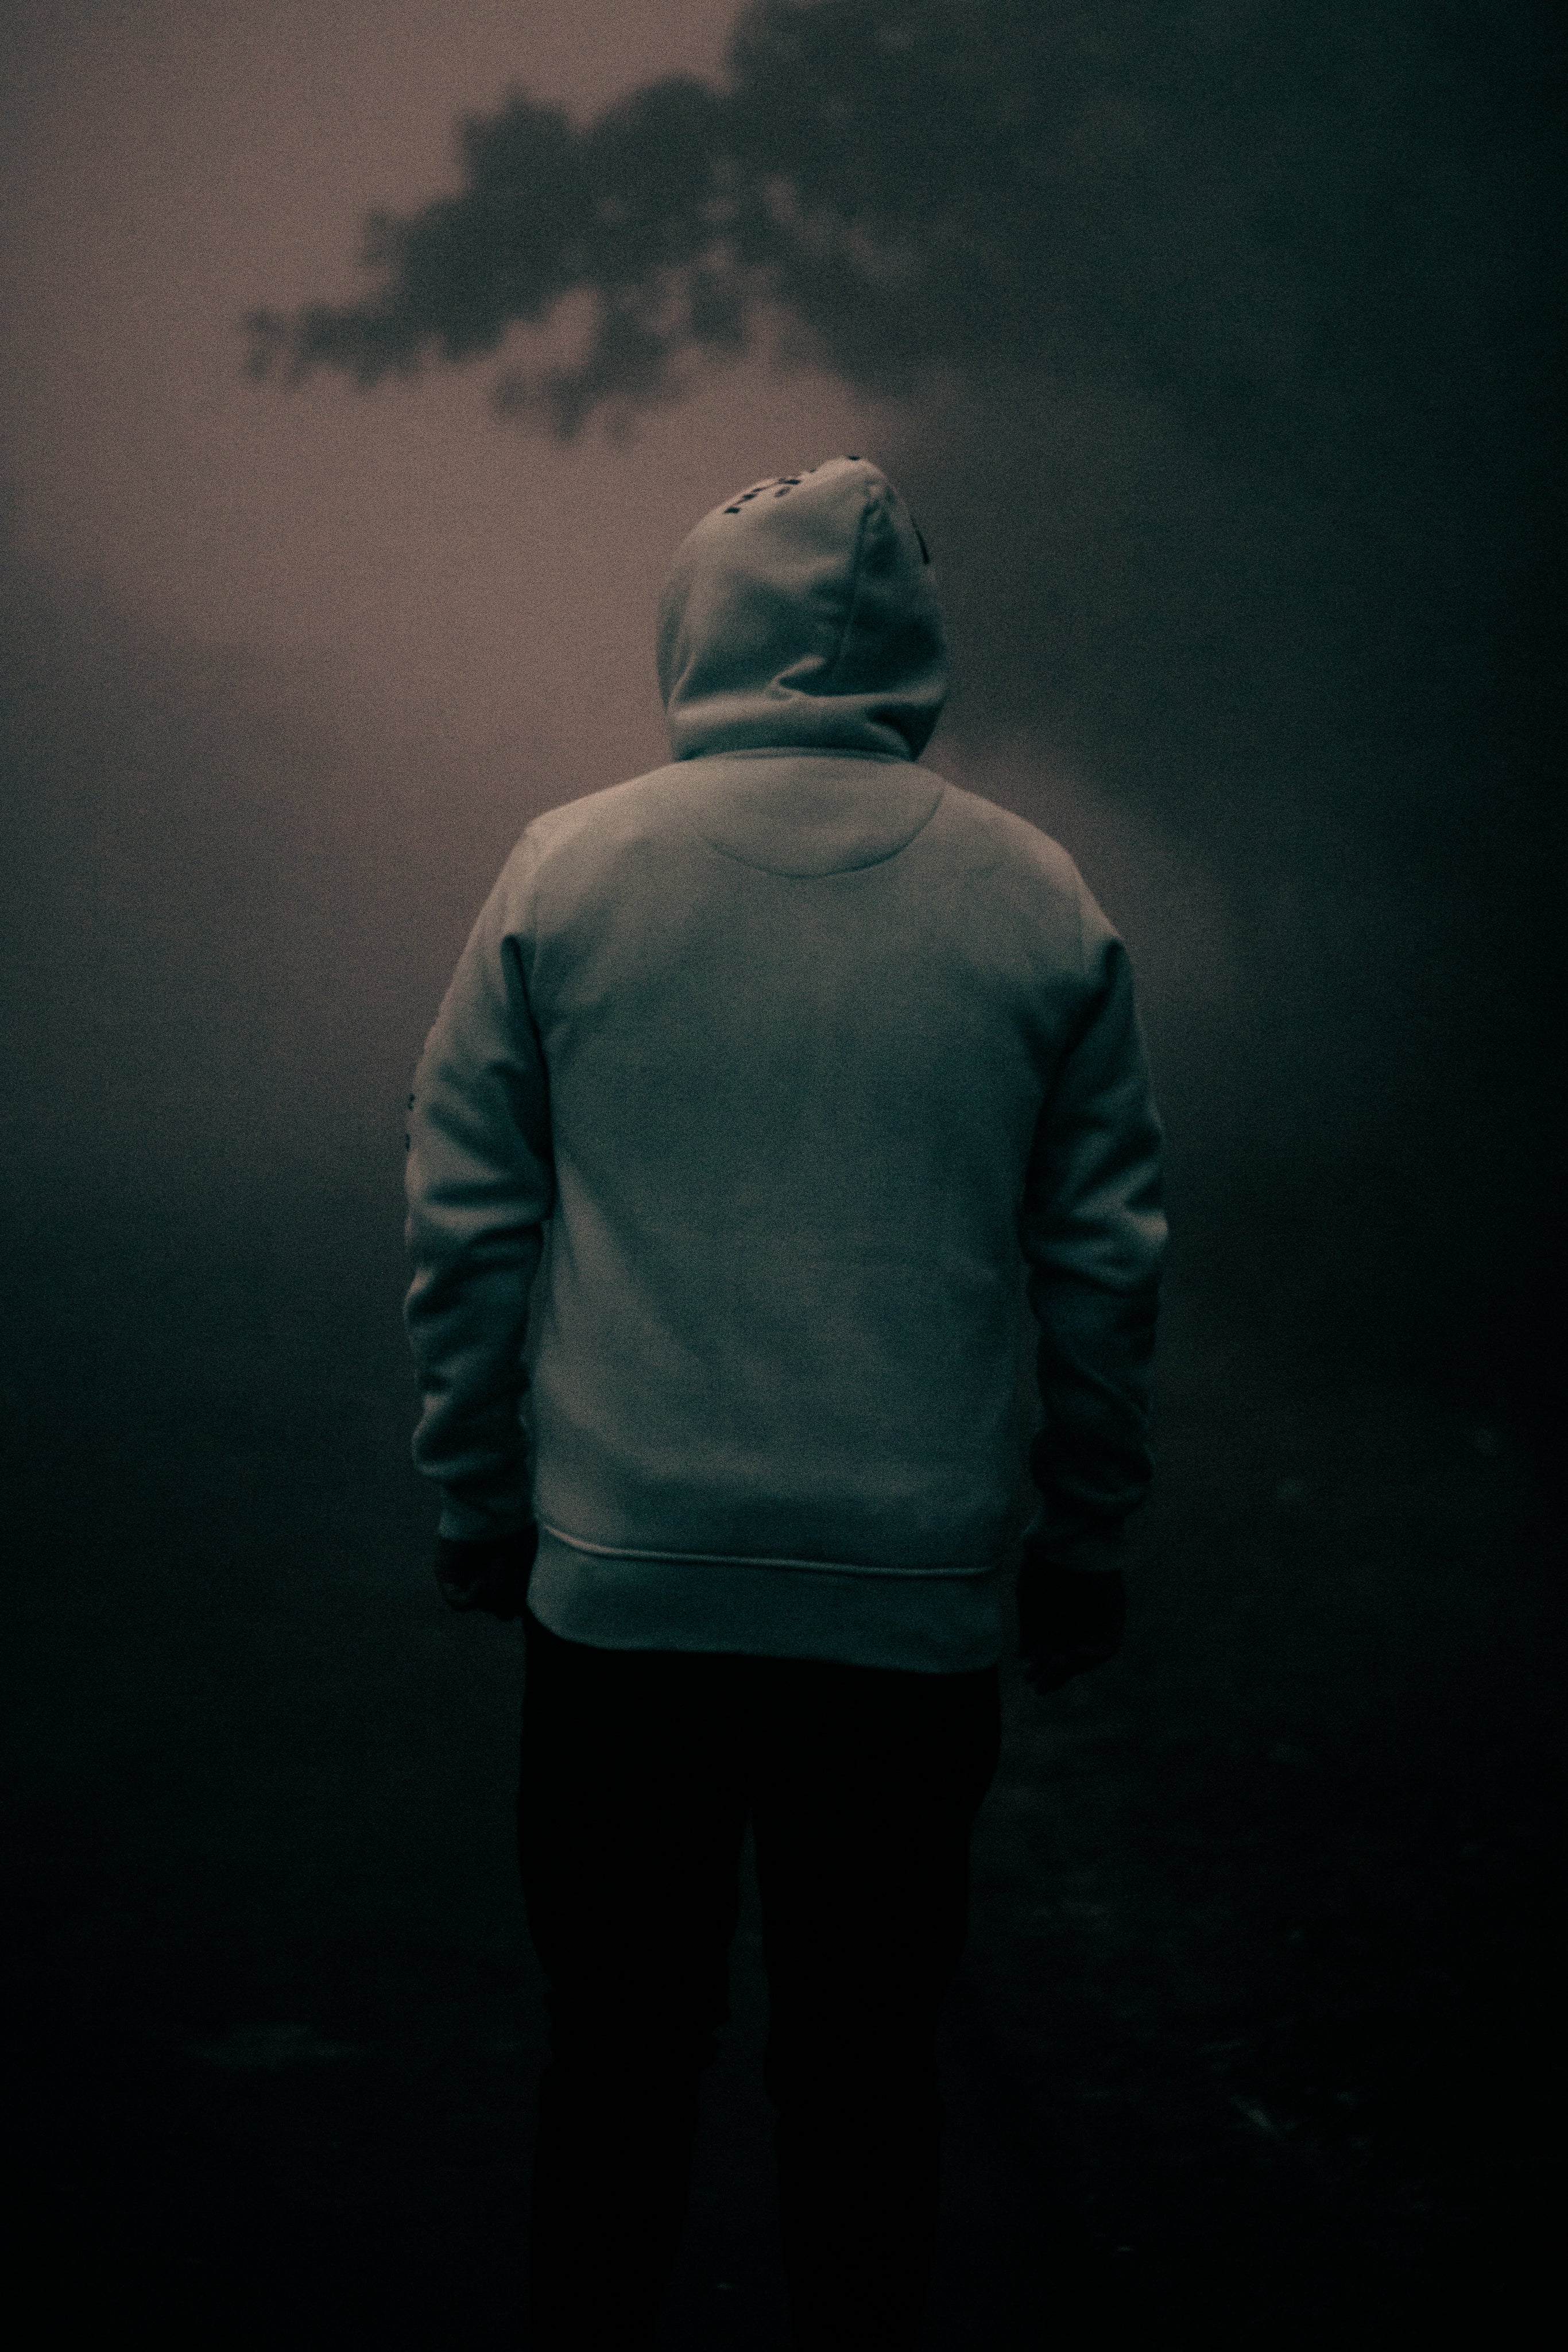 moody-image-of-a-person-in-grey-hooded-sweater.jpg